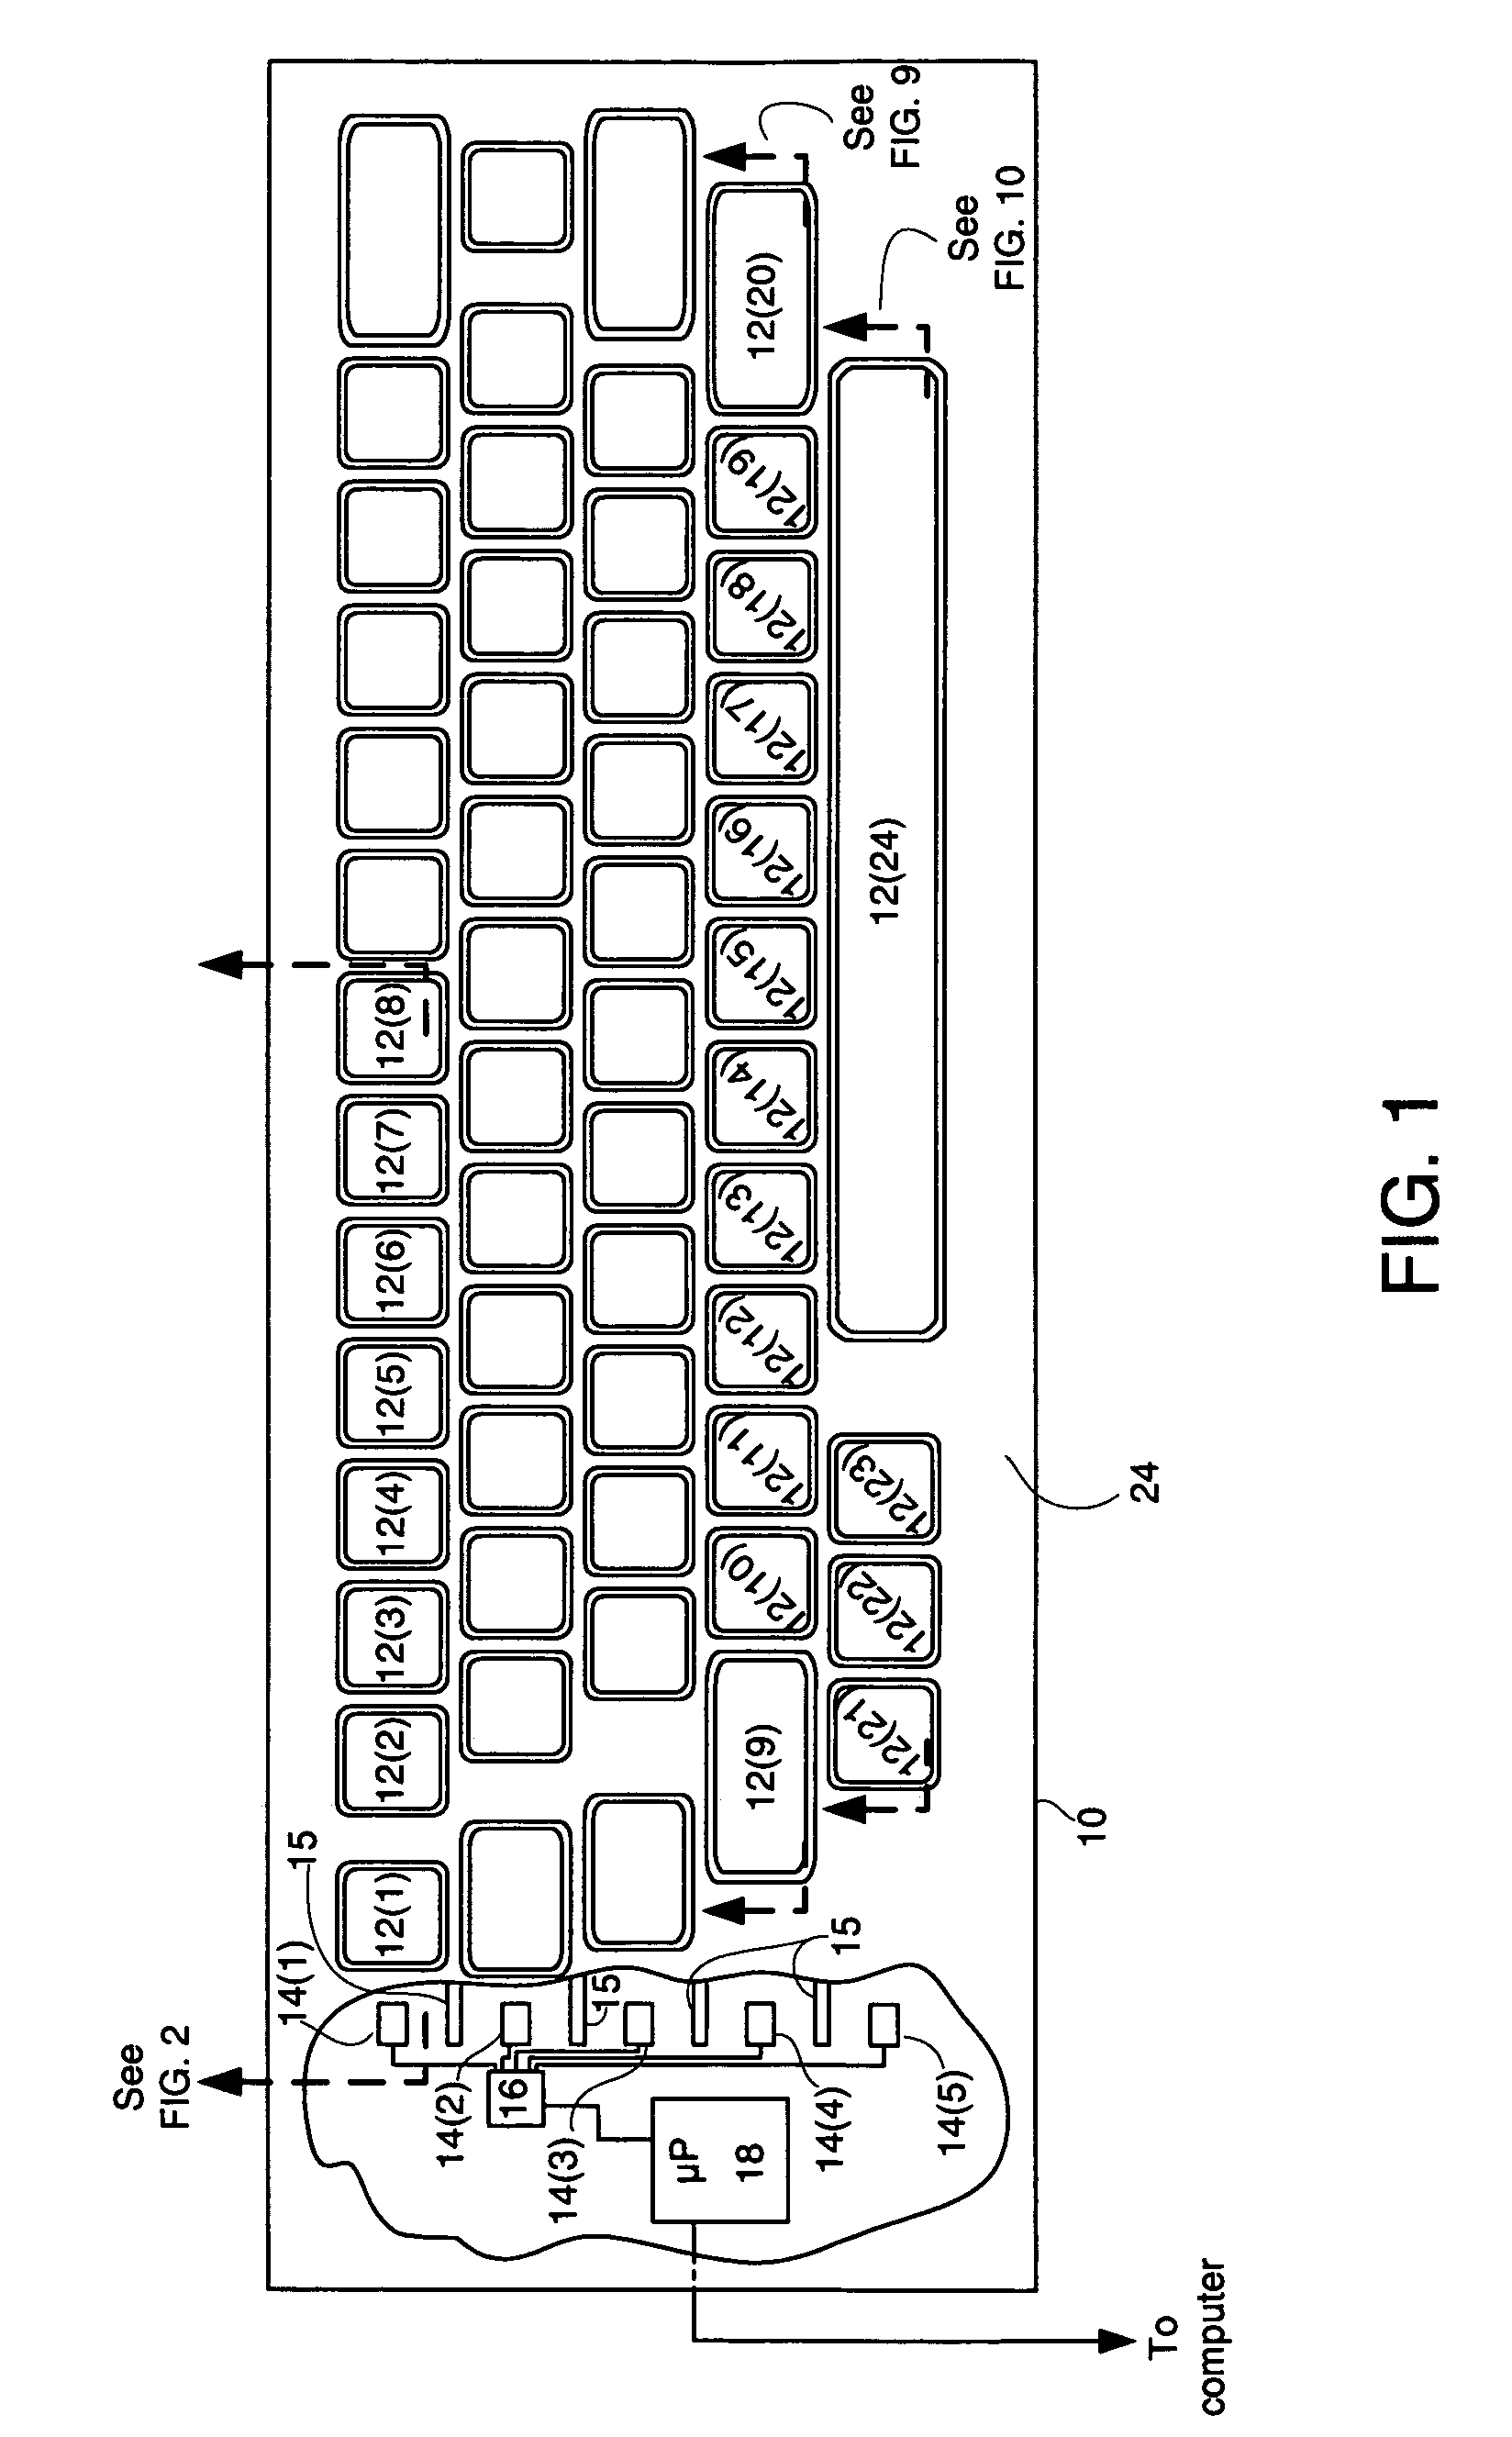 Keyboard or other input device using ranging for detection of control piece movement